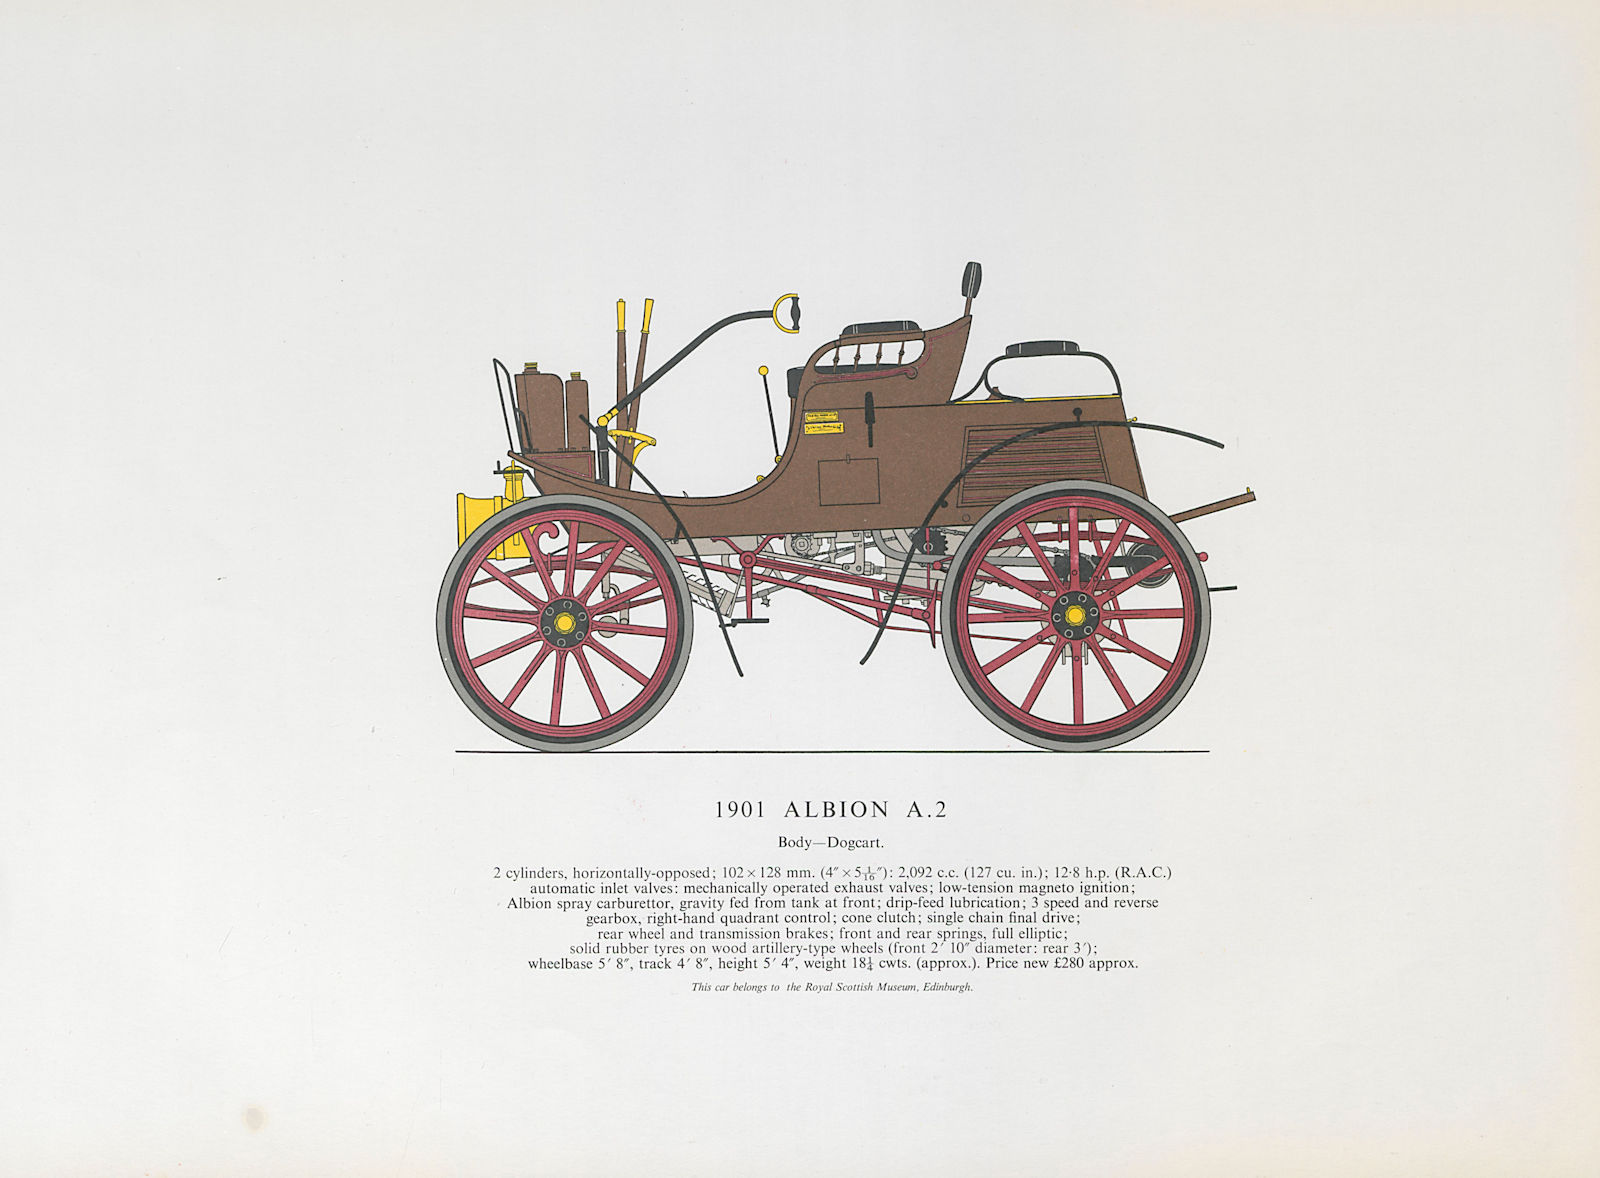 Associate Product Albion A.2 dogcart (1901) motor car print by George Oliver. Scotland 1966